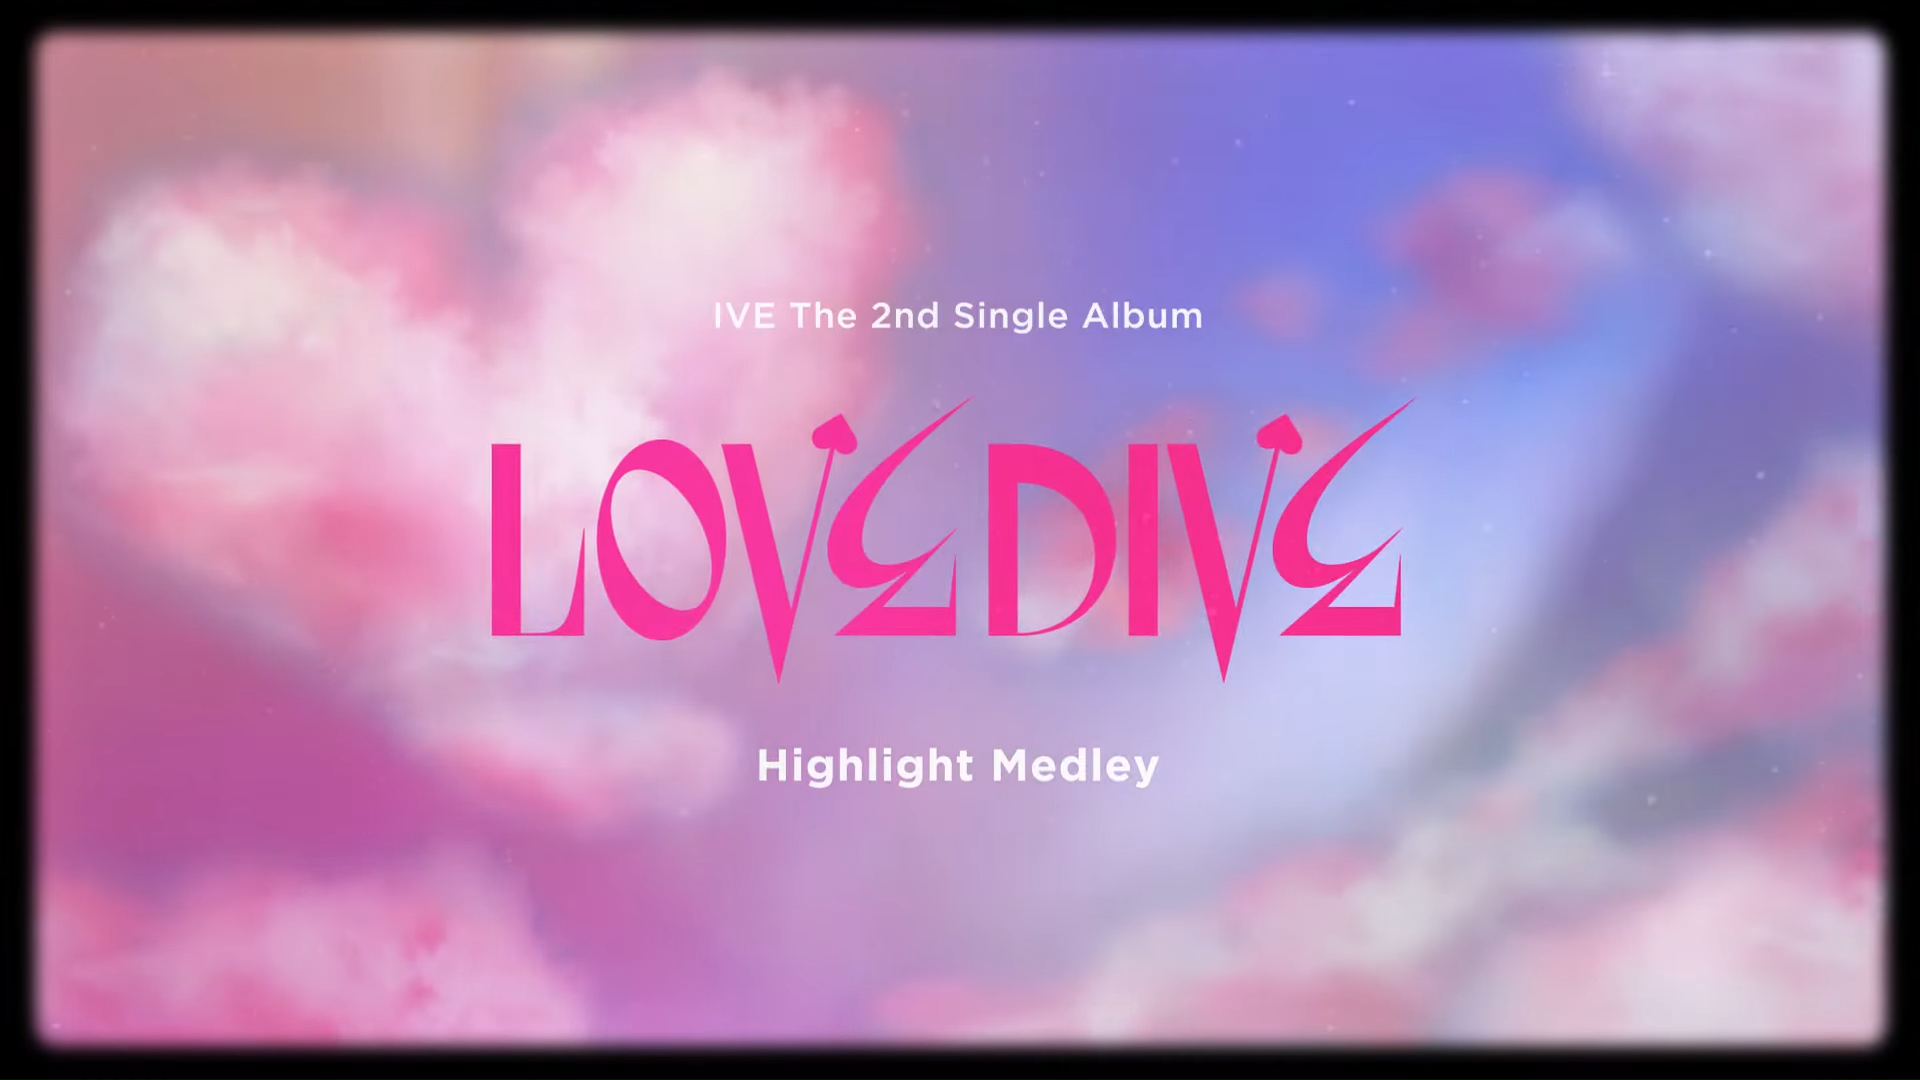 IVE gives fans a first listen to 'Love Dive' single album in new highlight medley